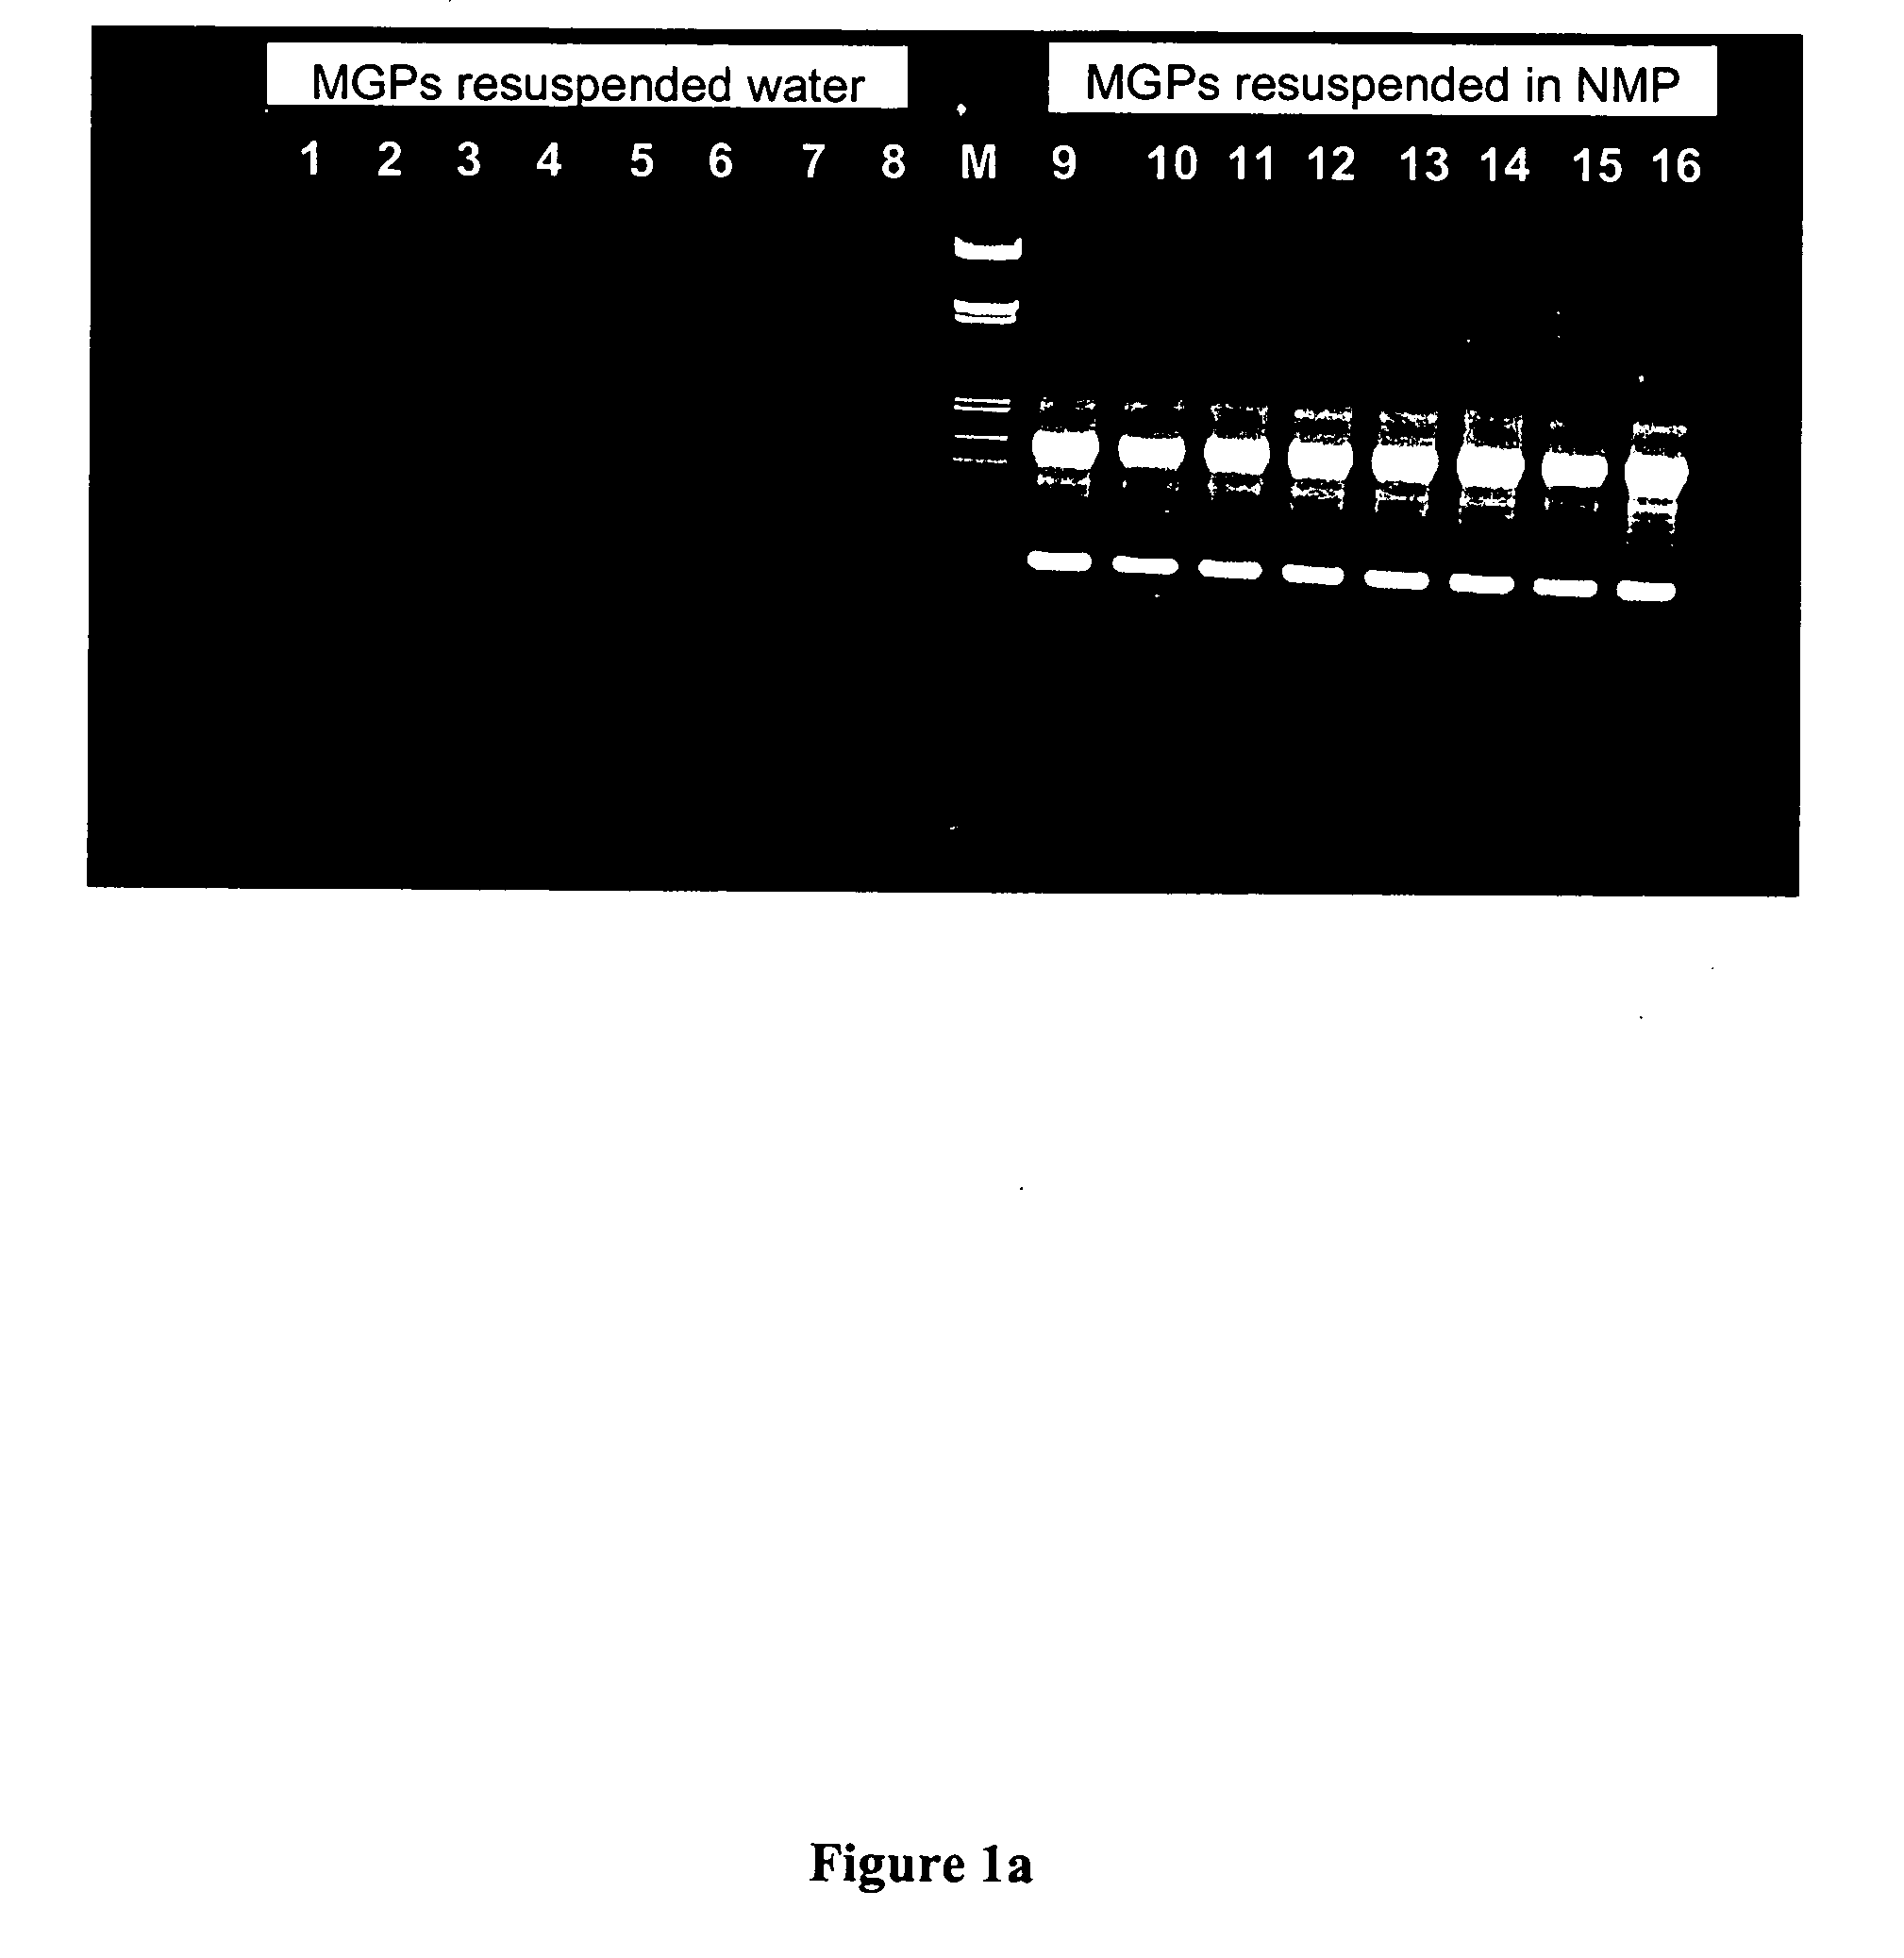 Methods for isolating nucleic acids